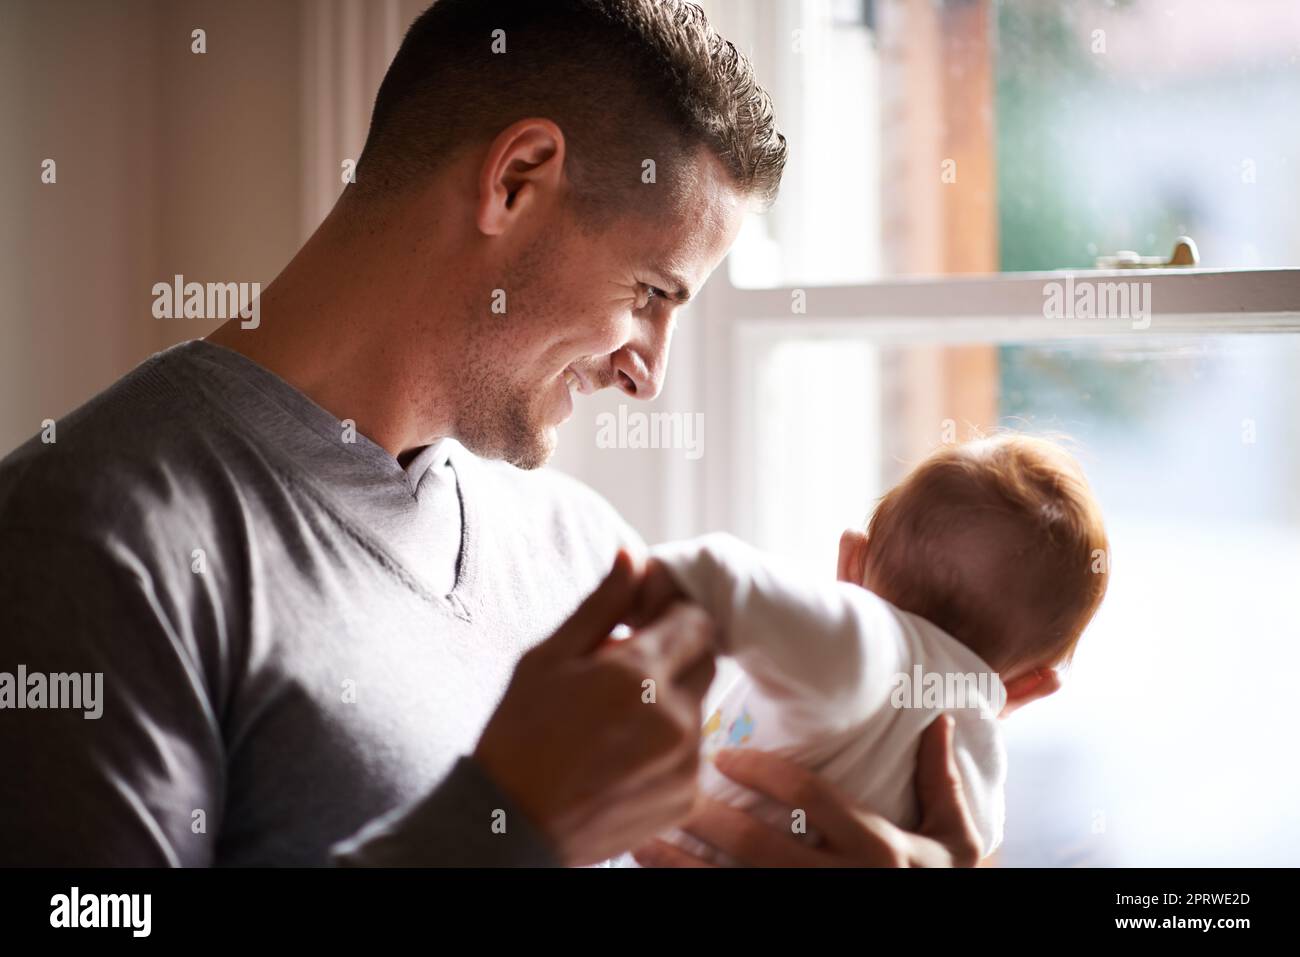 Its a big world out there but youll always be safe with me. a young father standing by a window holding his adorable baby girl. Stock Photo